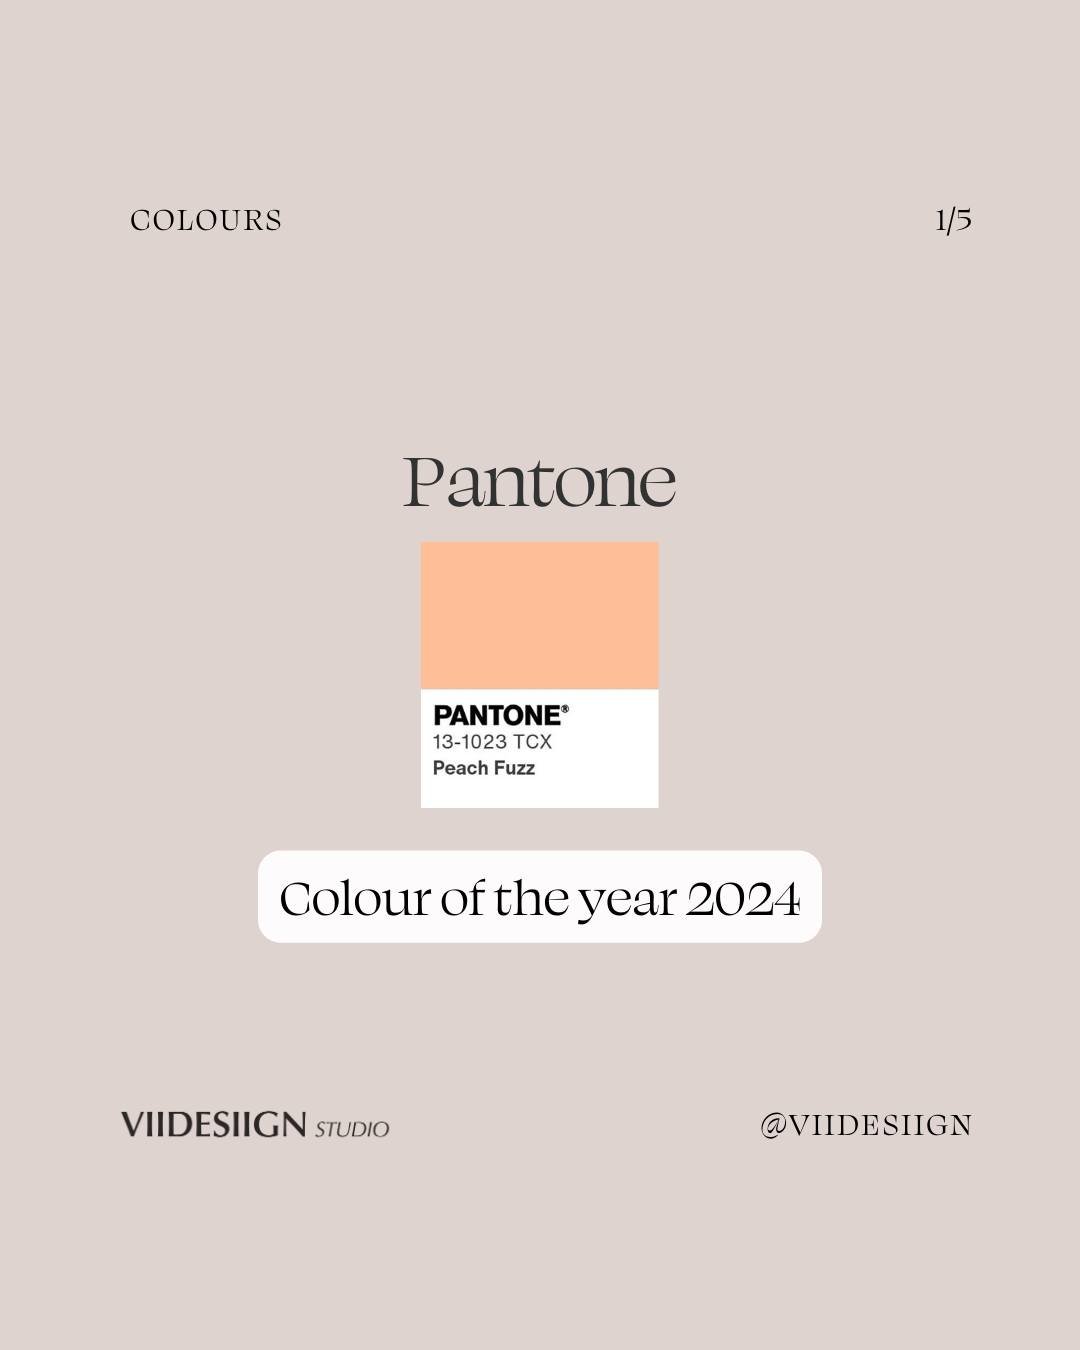 PANTONE 13-1023 Peach Fuzz is more than just a colour 🎨

It's a feeling, a desire to nurture ourselves and others✨
This velvety, gentle peach tone embodies an all-embracing spirit that enriches mind, body, and soul.

Save to implement later
&amp; Co